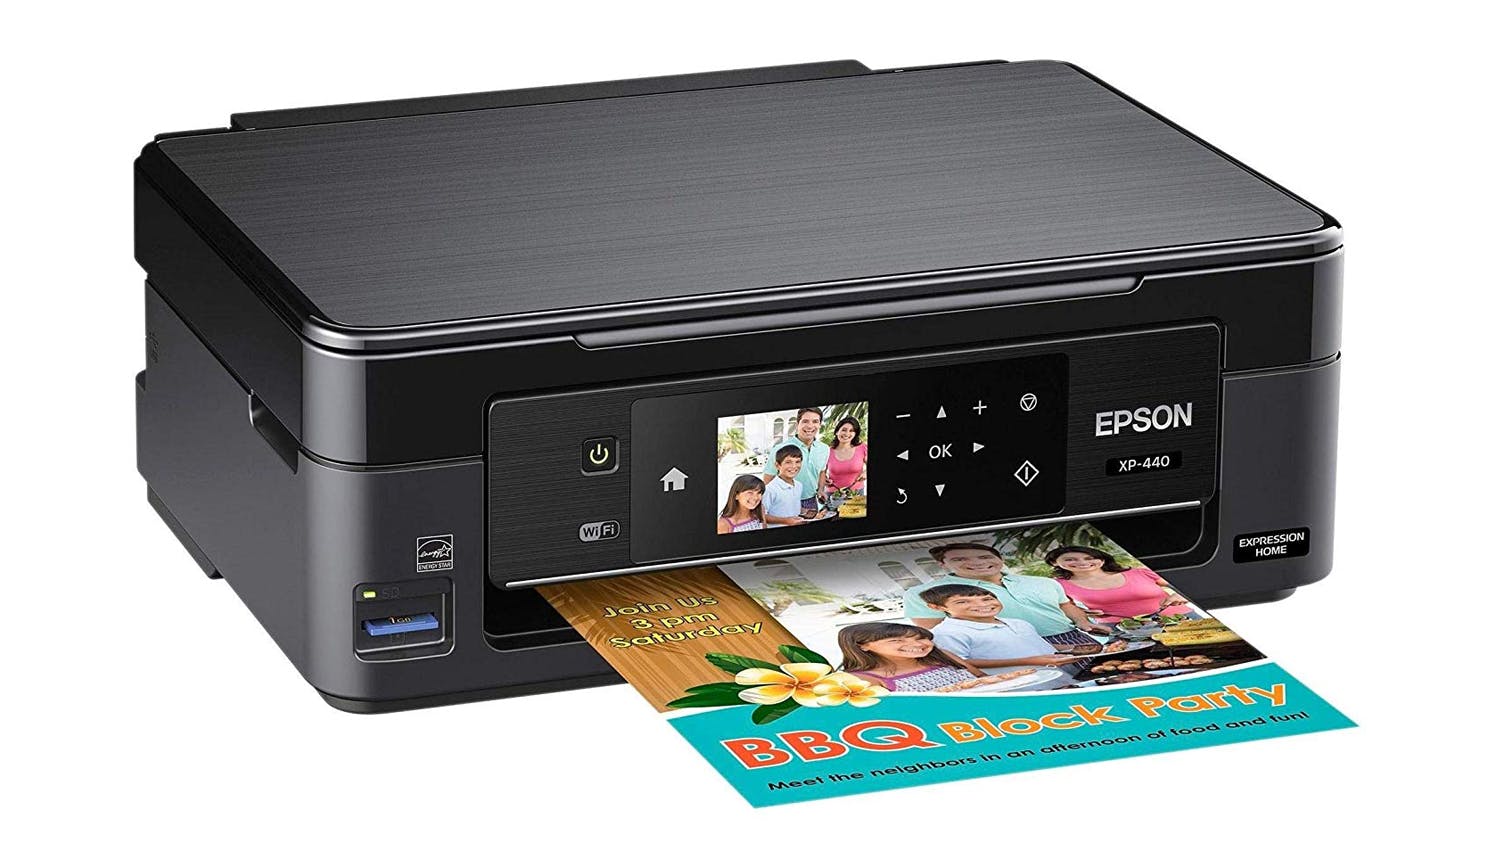  Epson  Expression Home XP 440  All in One Printer Harvey 